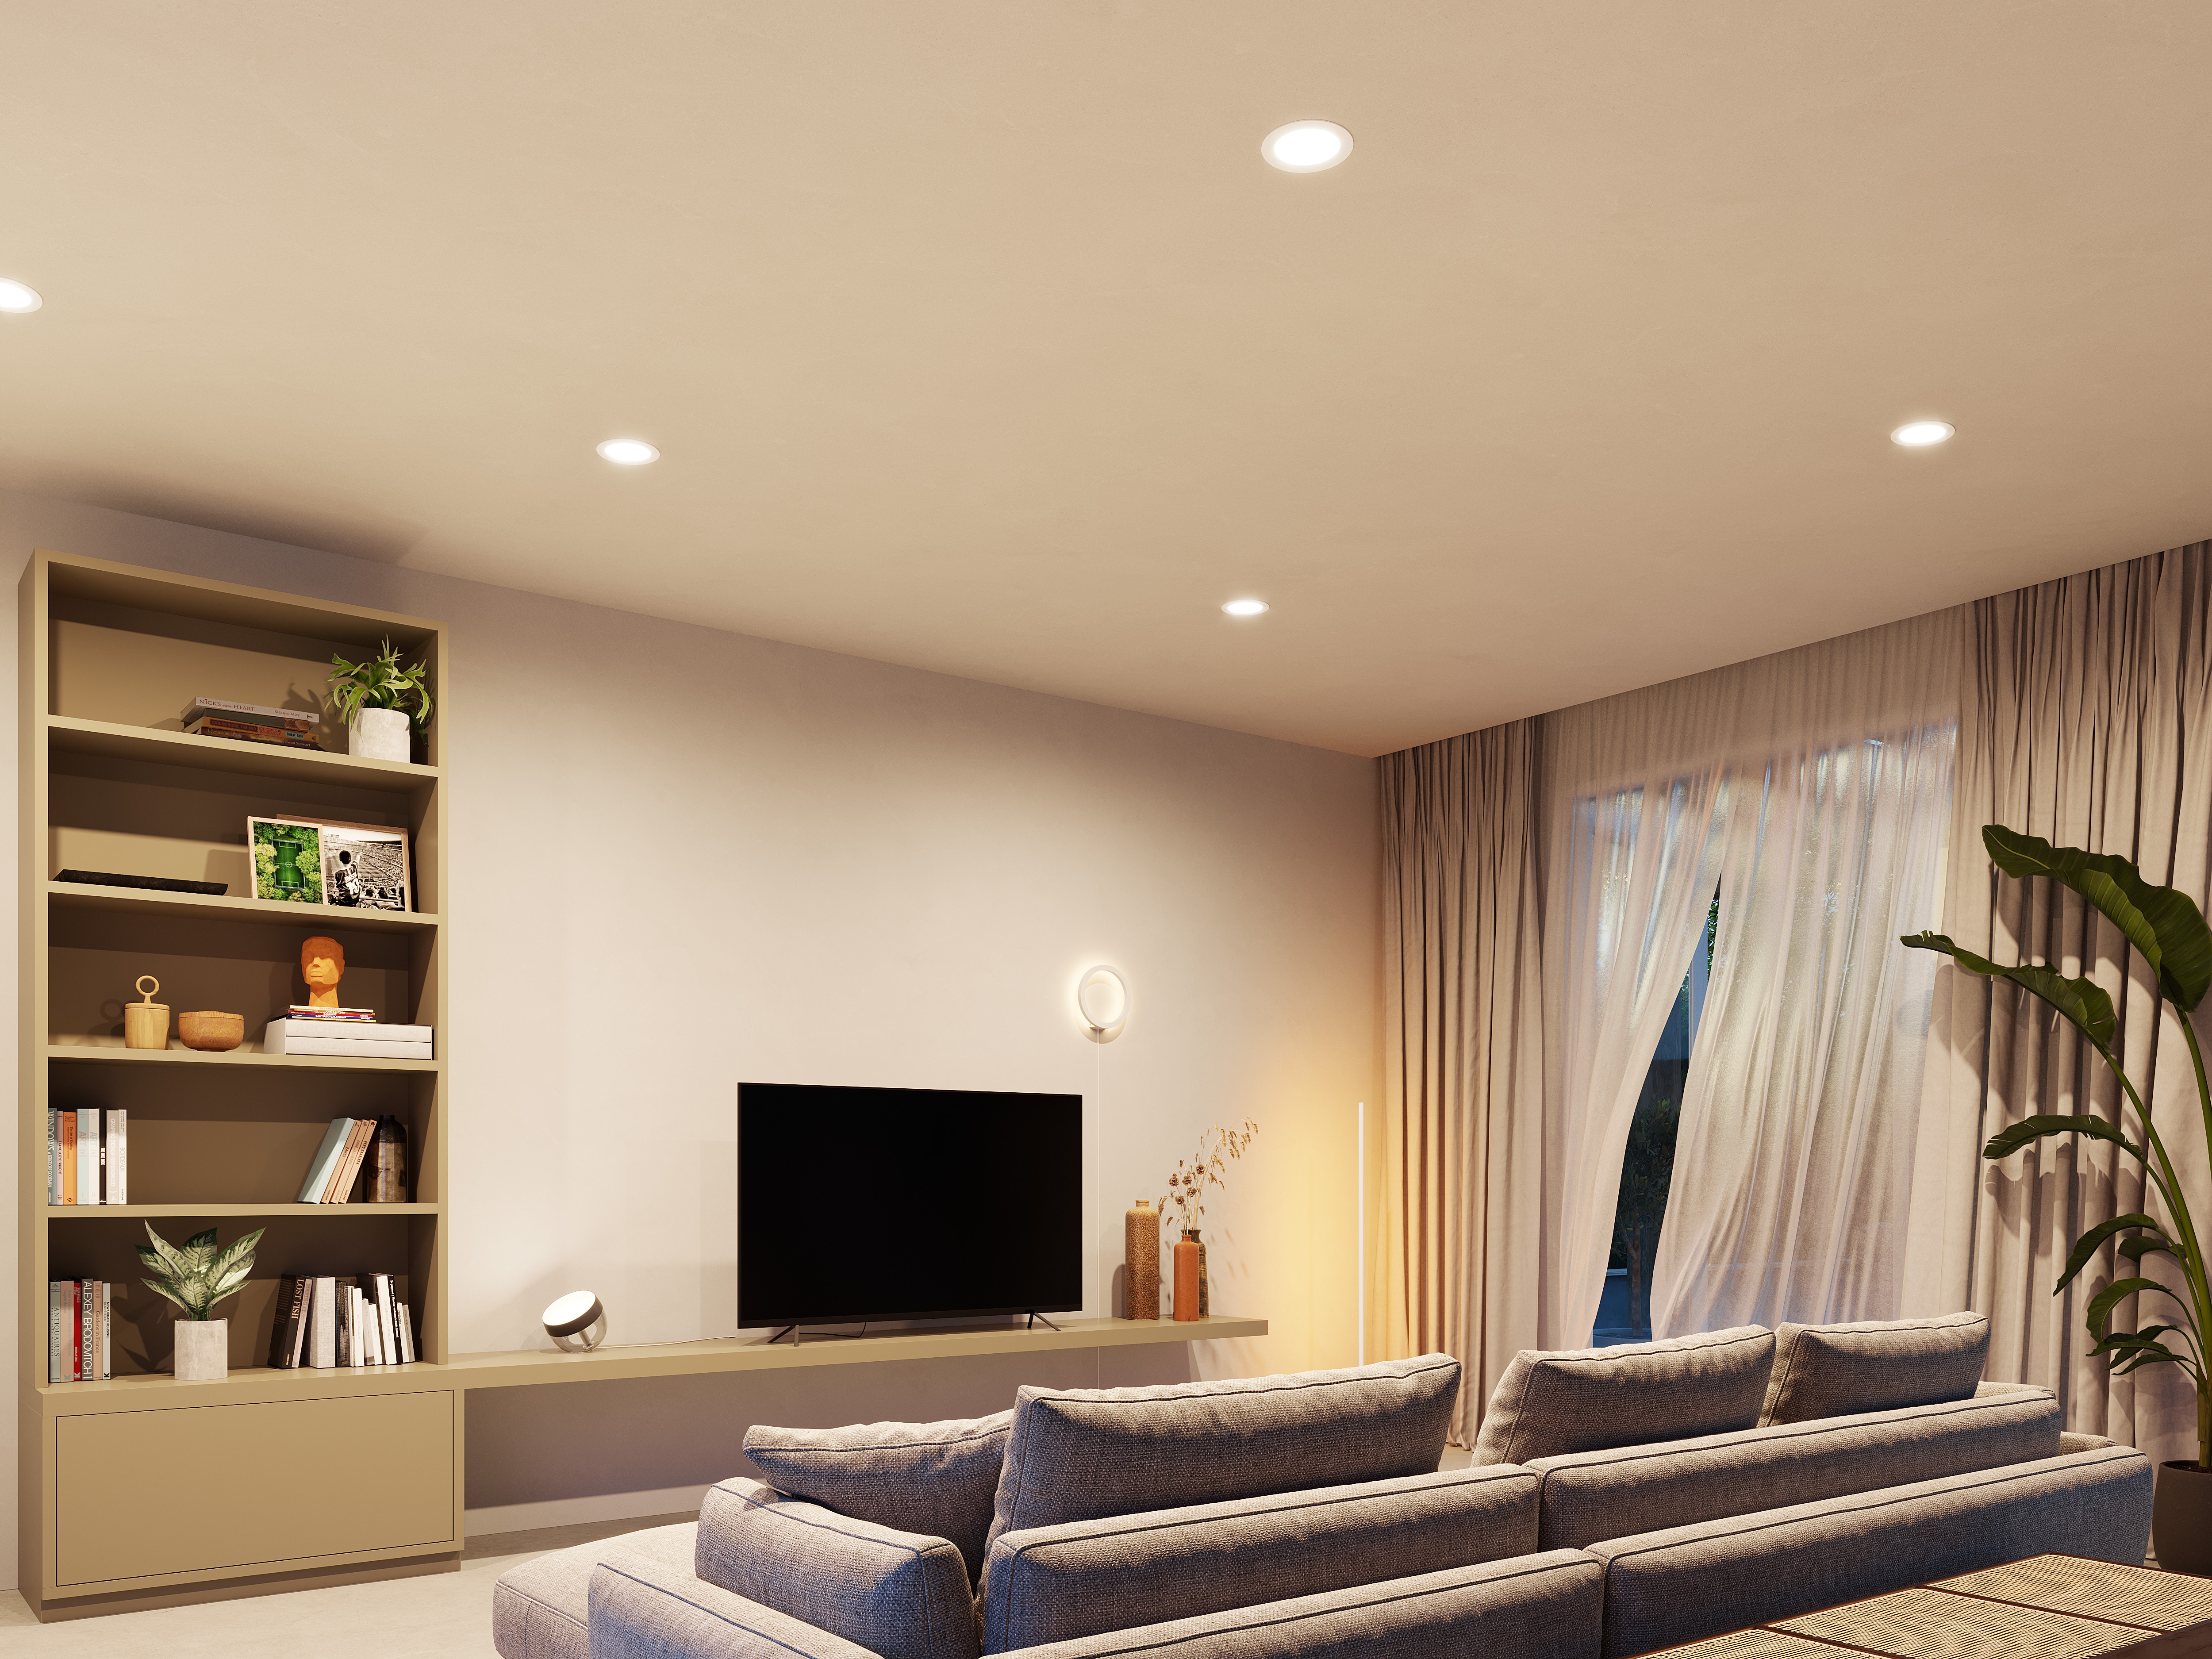 Interview] Samsung and Philips Hue Make Home Entertainment Including Games  and Movies More Immersive Than Ever – Samsung Global Newsroom